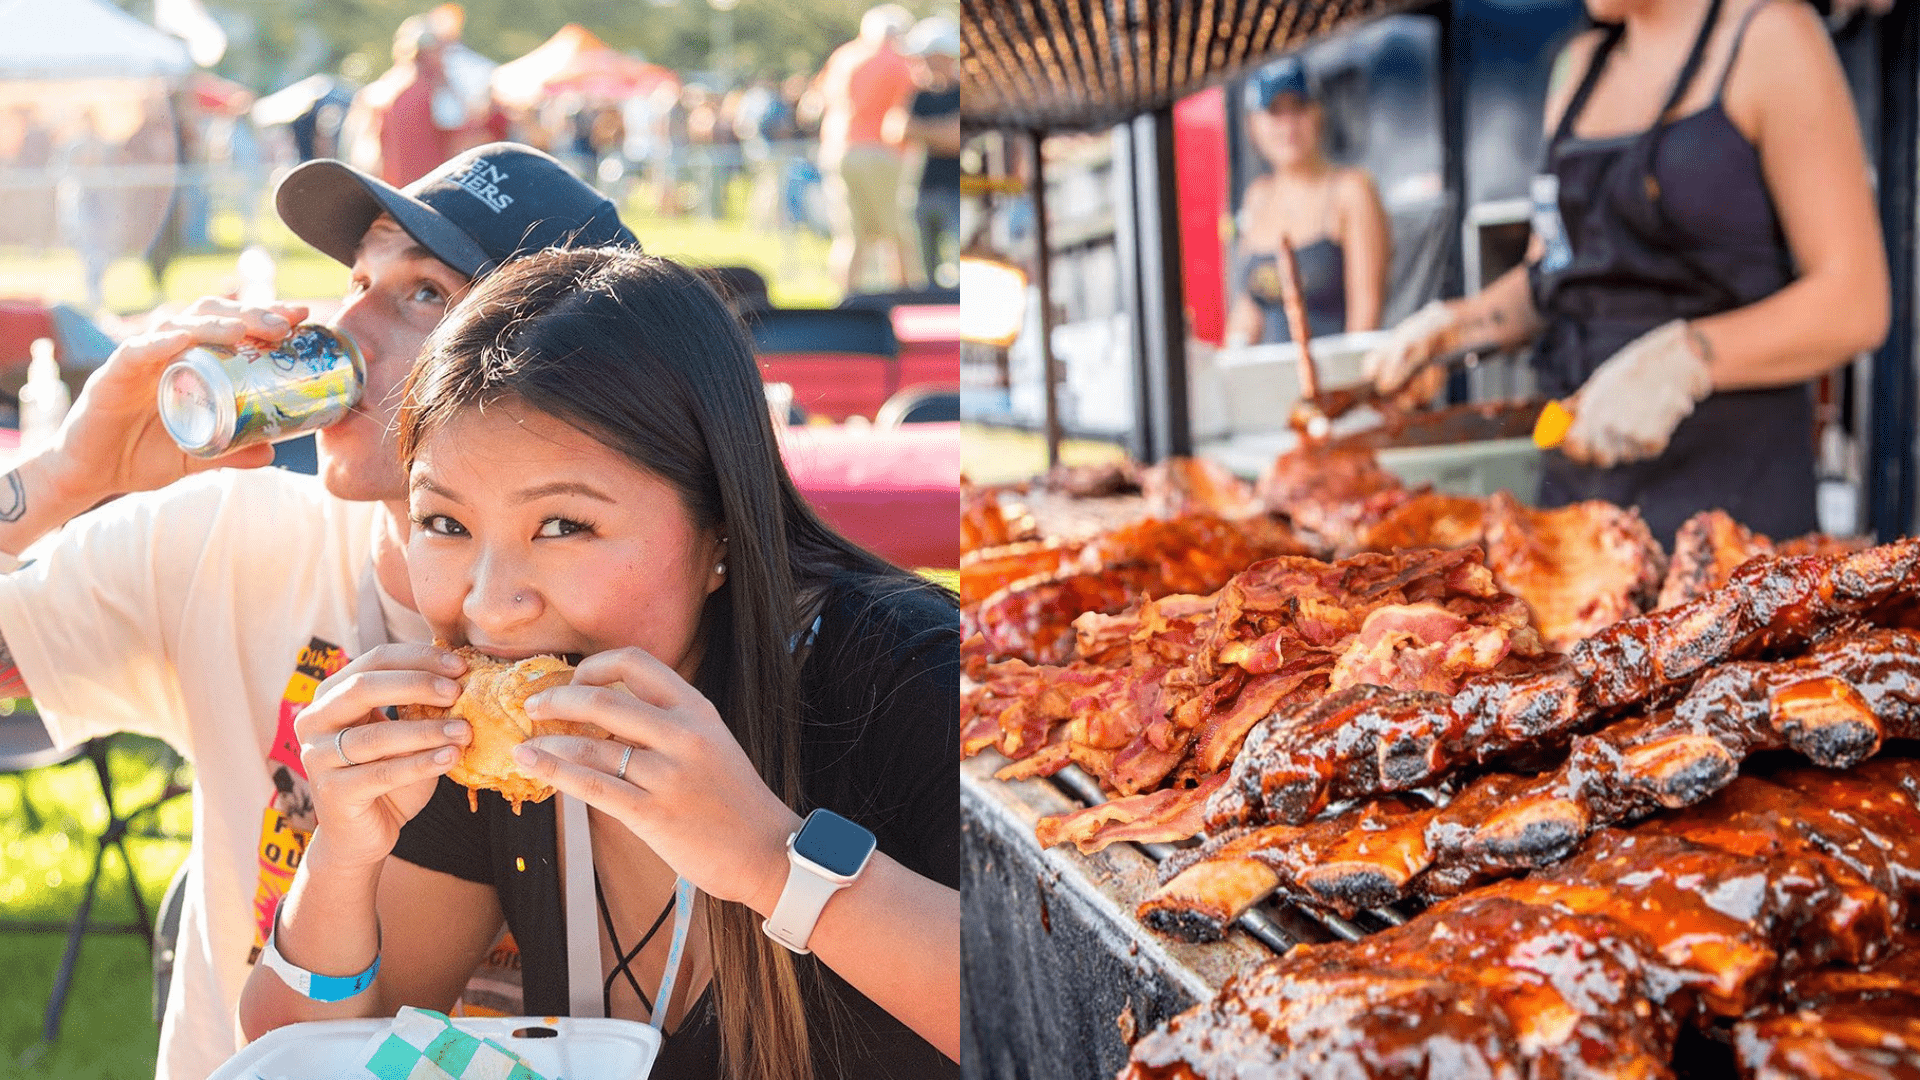 6th Annual St. Bacon and BBQ returns to Park weekend - I Love the Burg